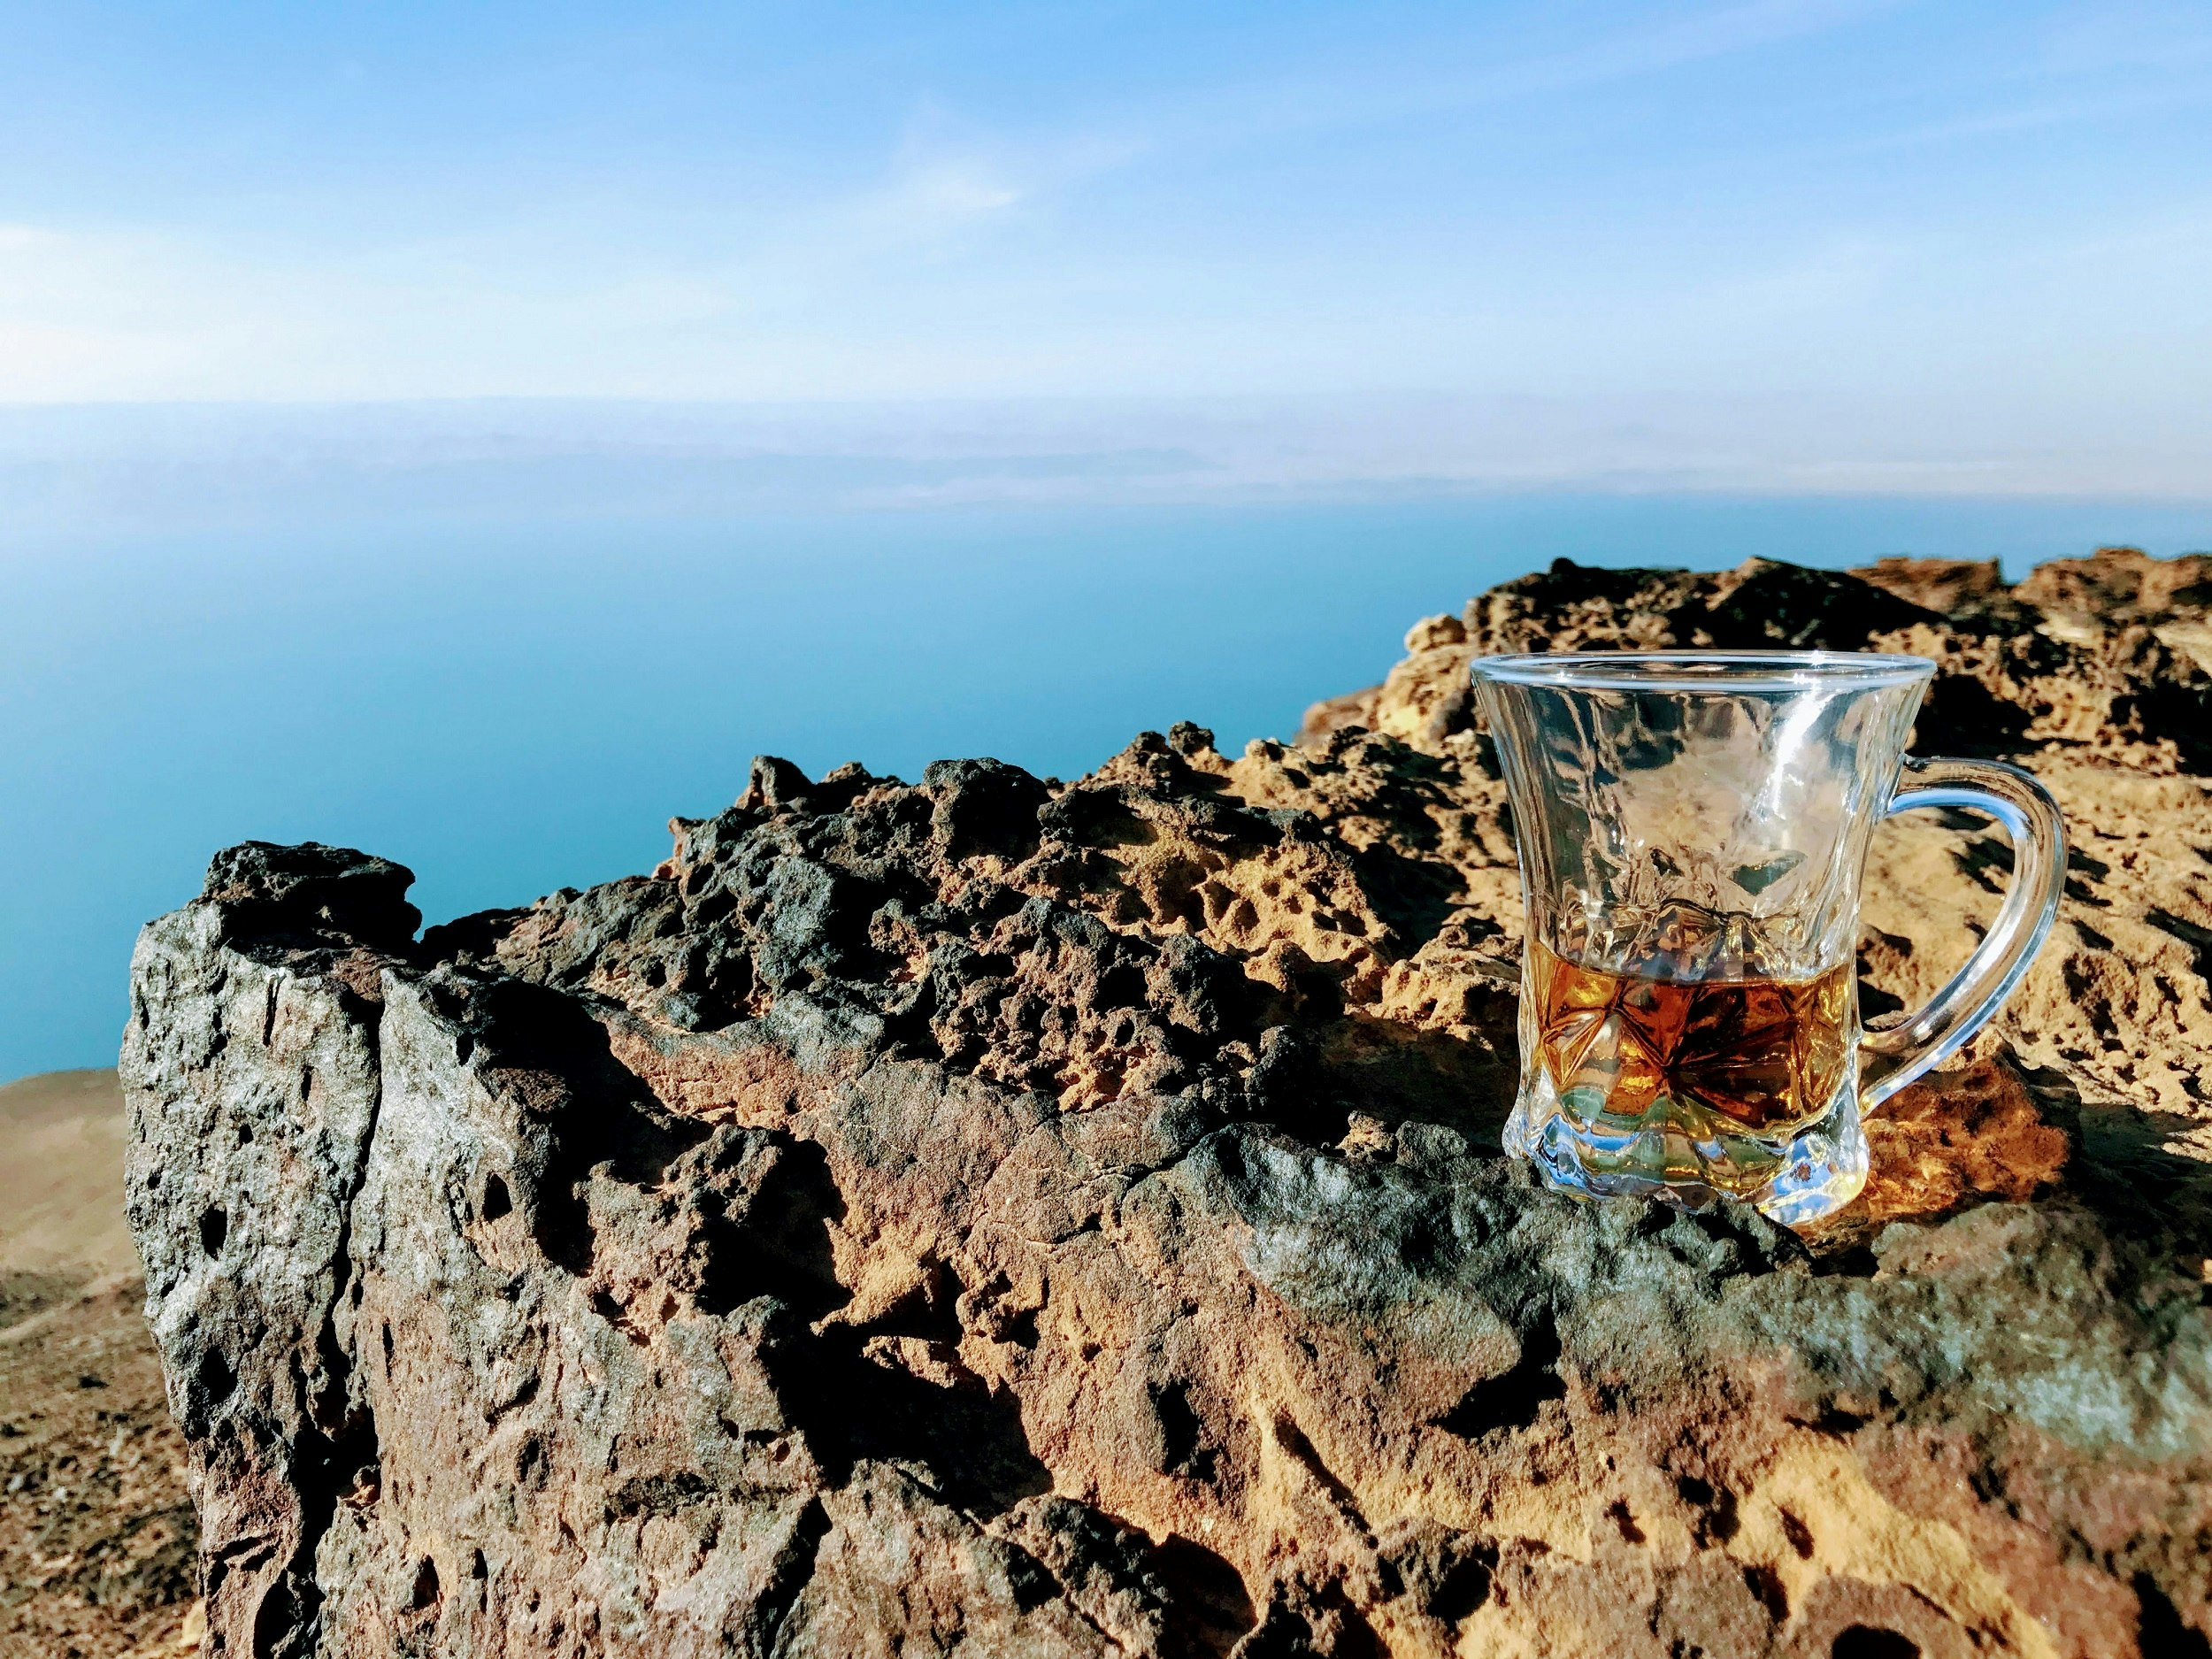 A decorative glass cup (half-full of tea) with handle sits on a rust-coloured rock overlooking the Dead Sea.